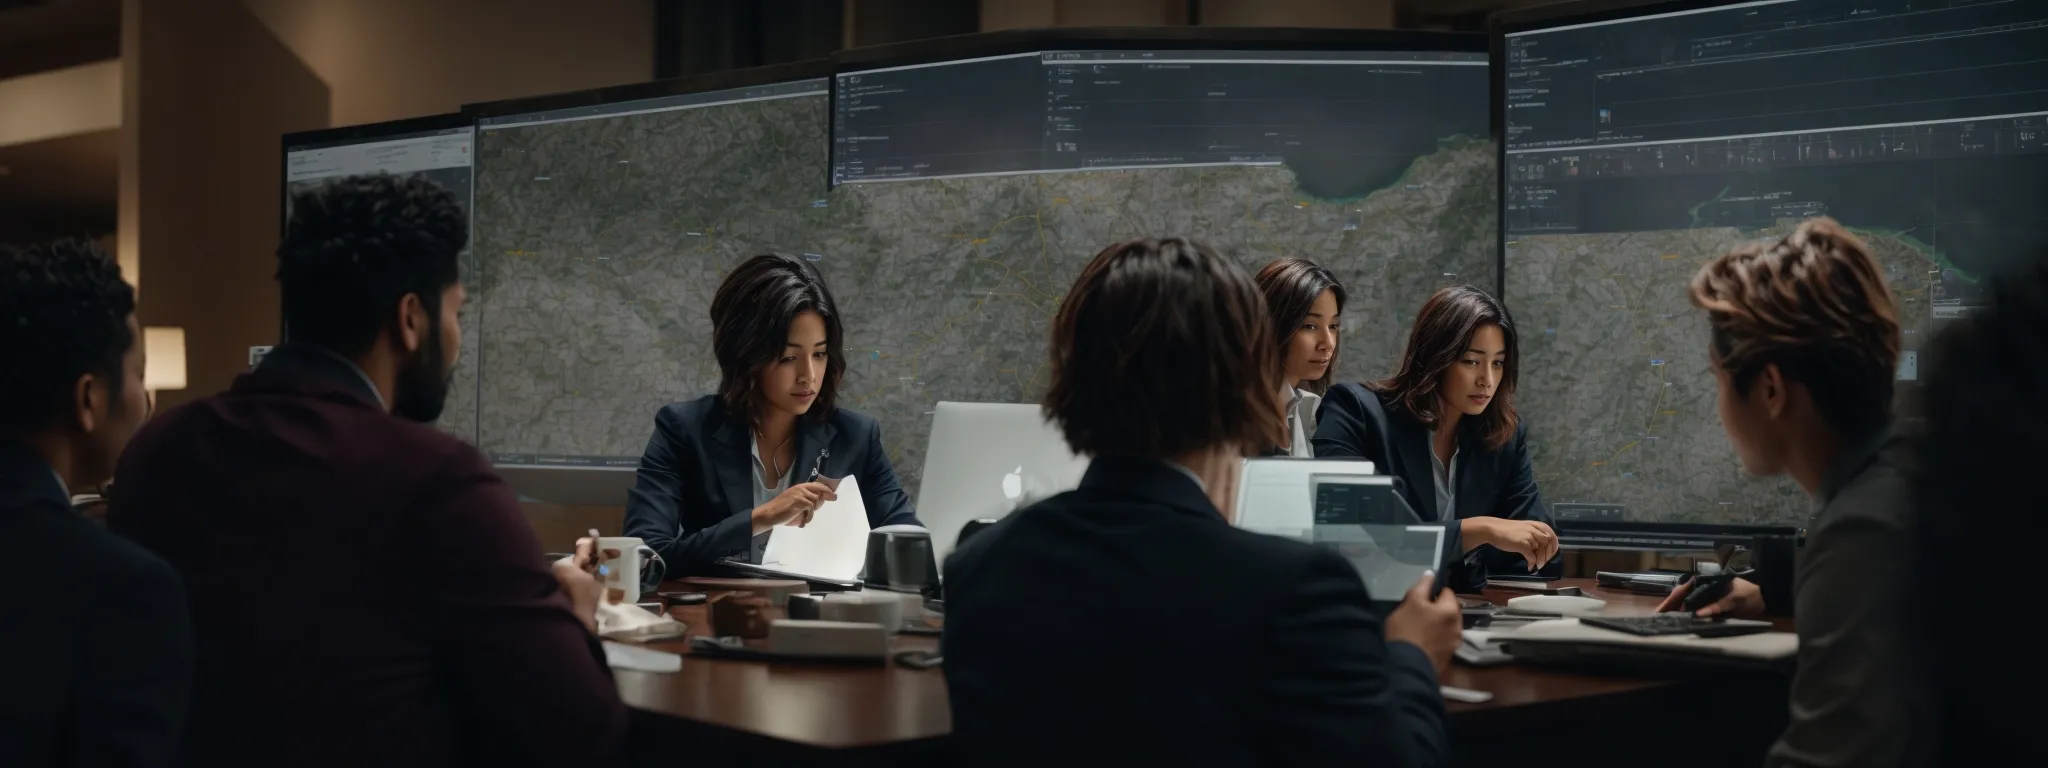 a diverse group of professionals congregates around a laptop, analyzing data on a digital map interface.